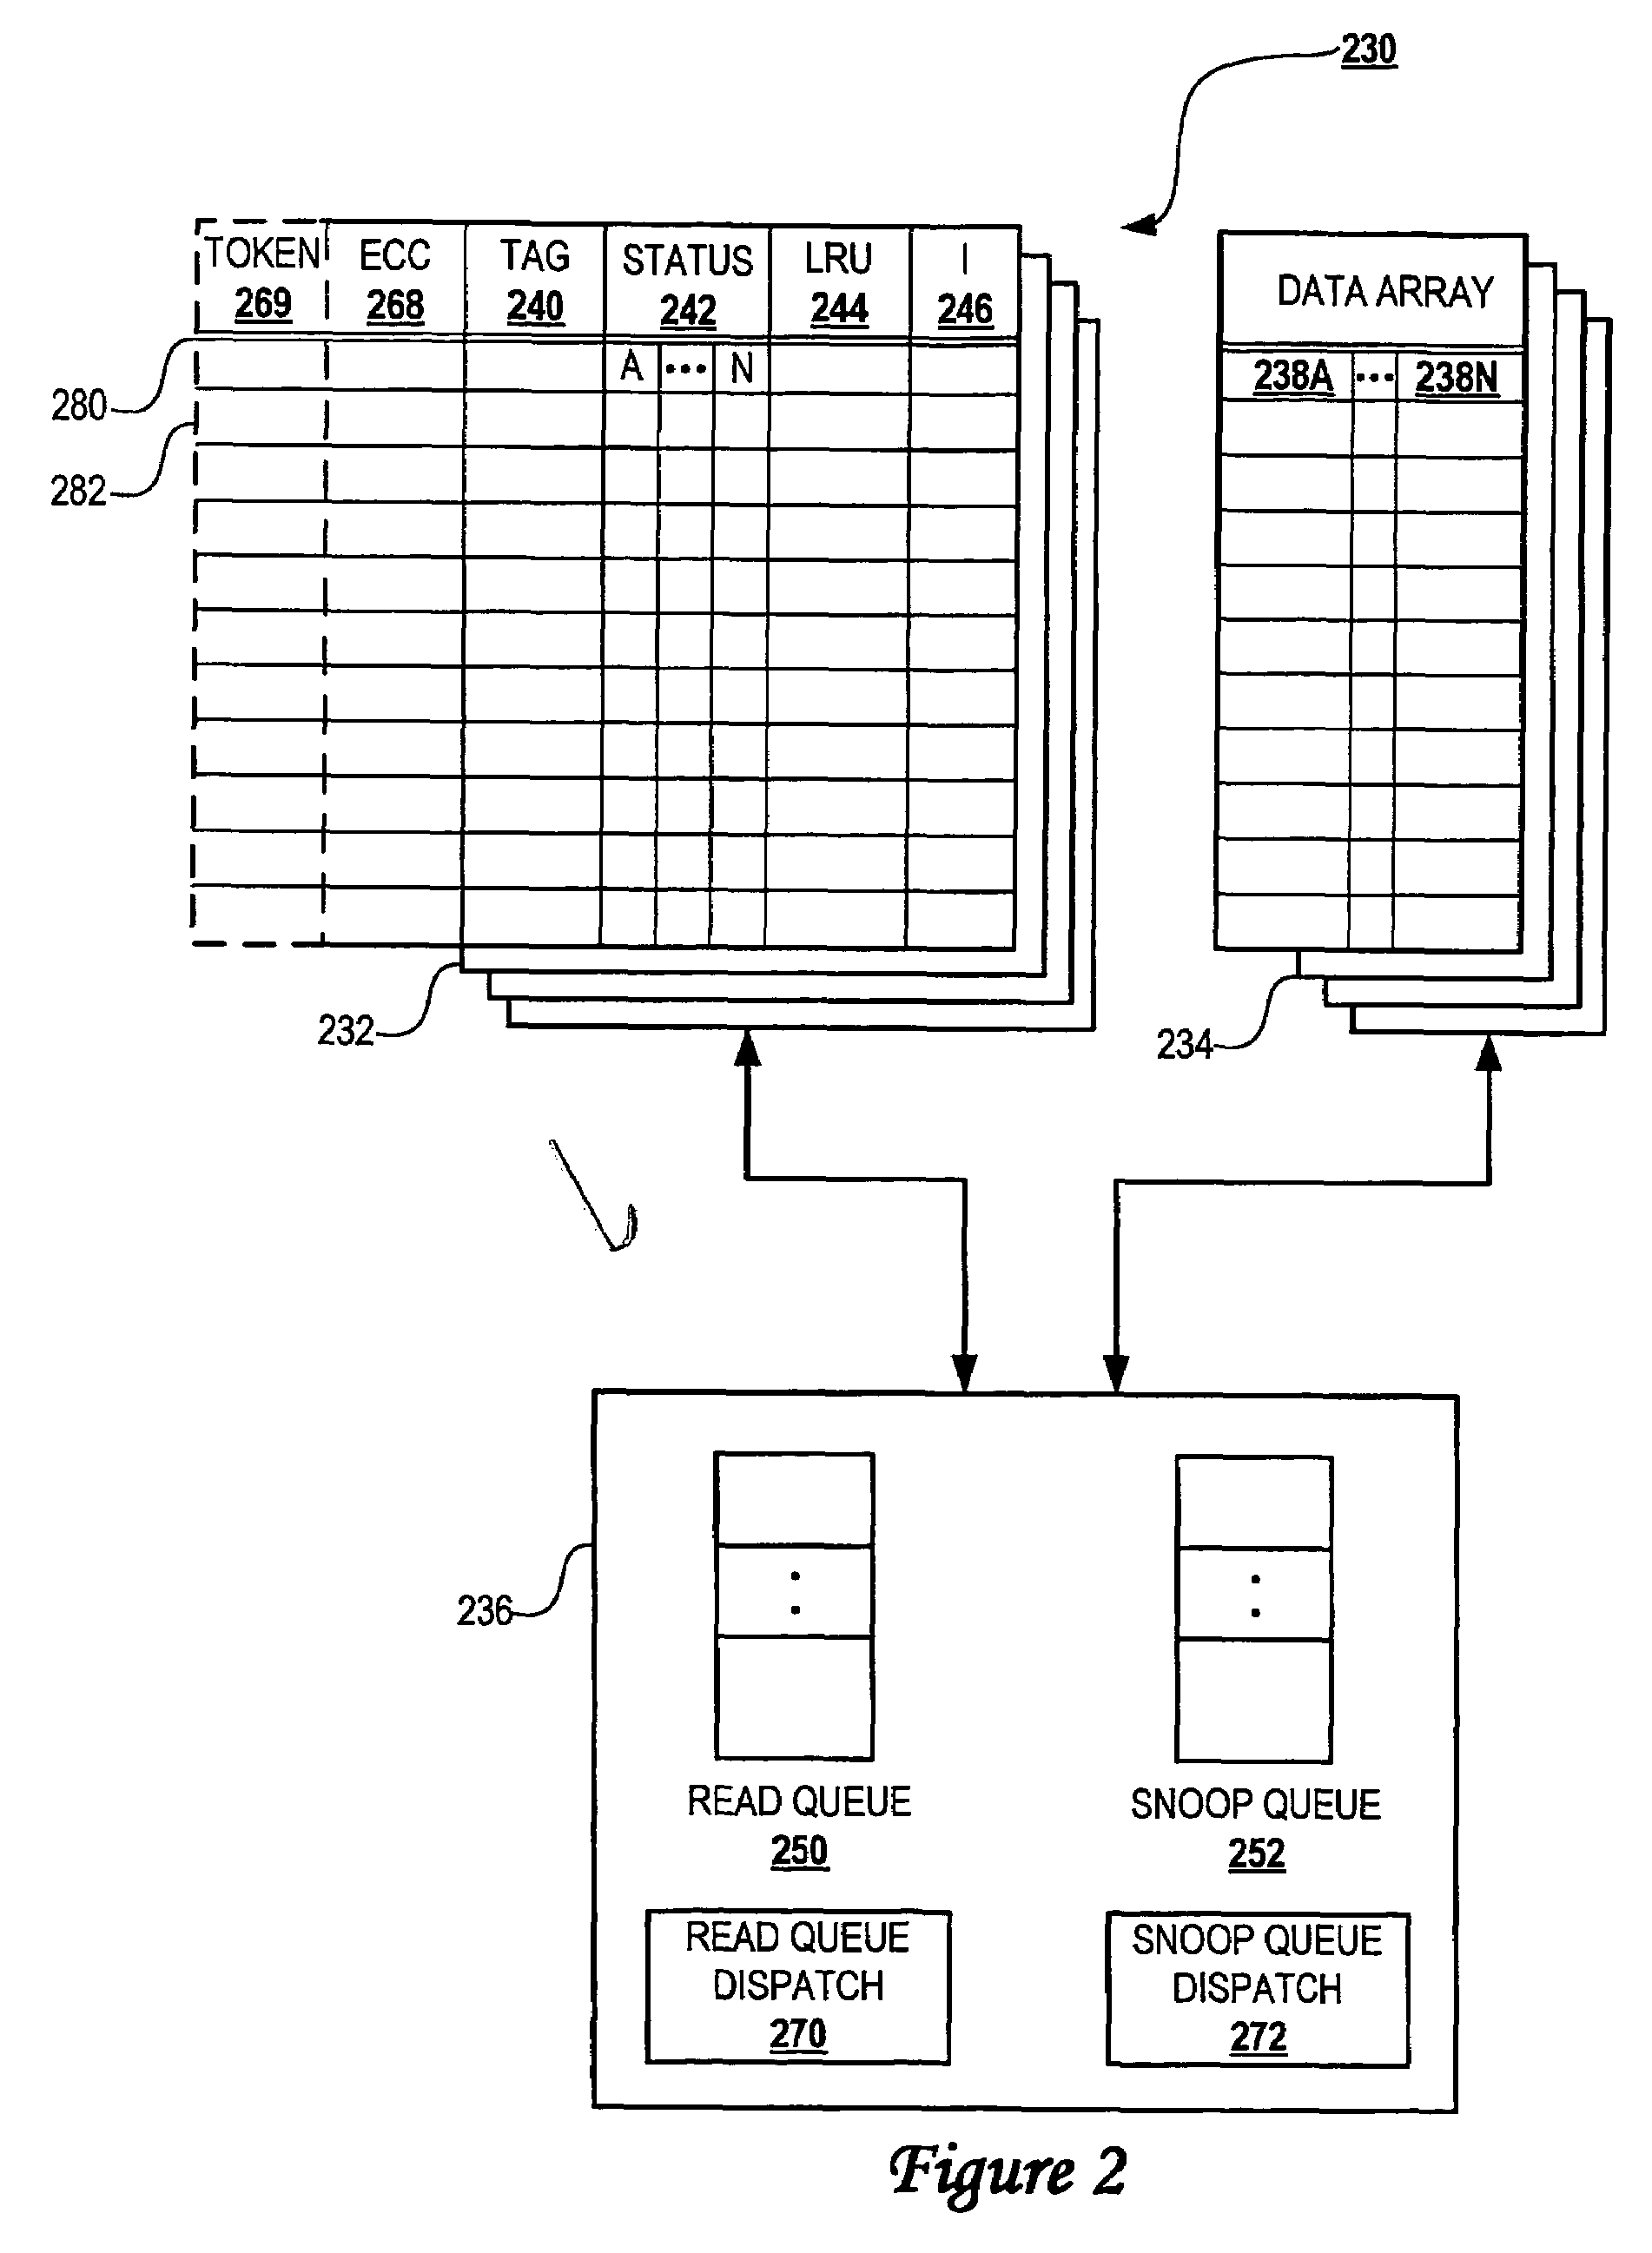 System, method and computer program product for application-level cache-mapping awareness and reallocation requests